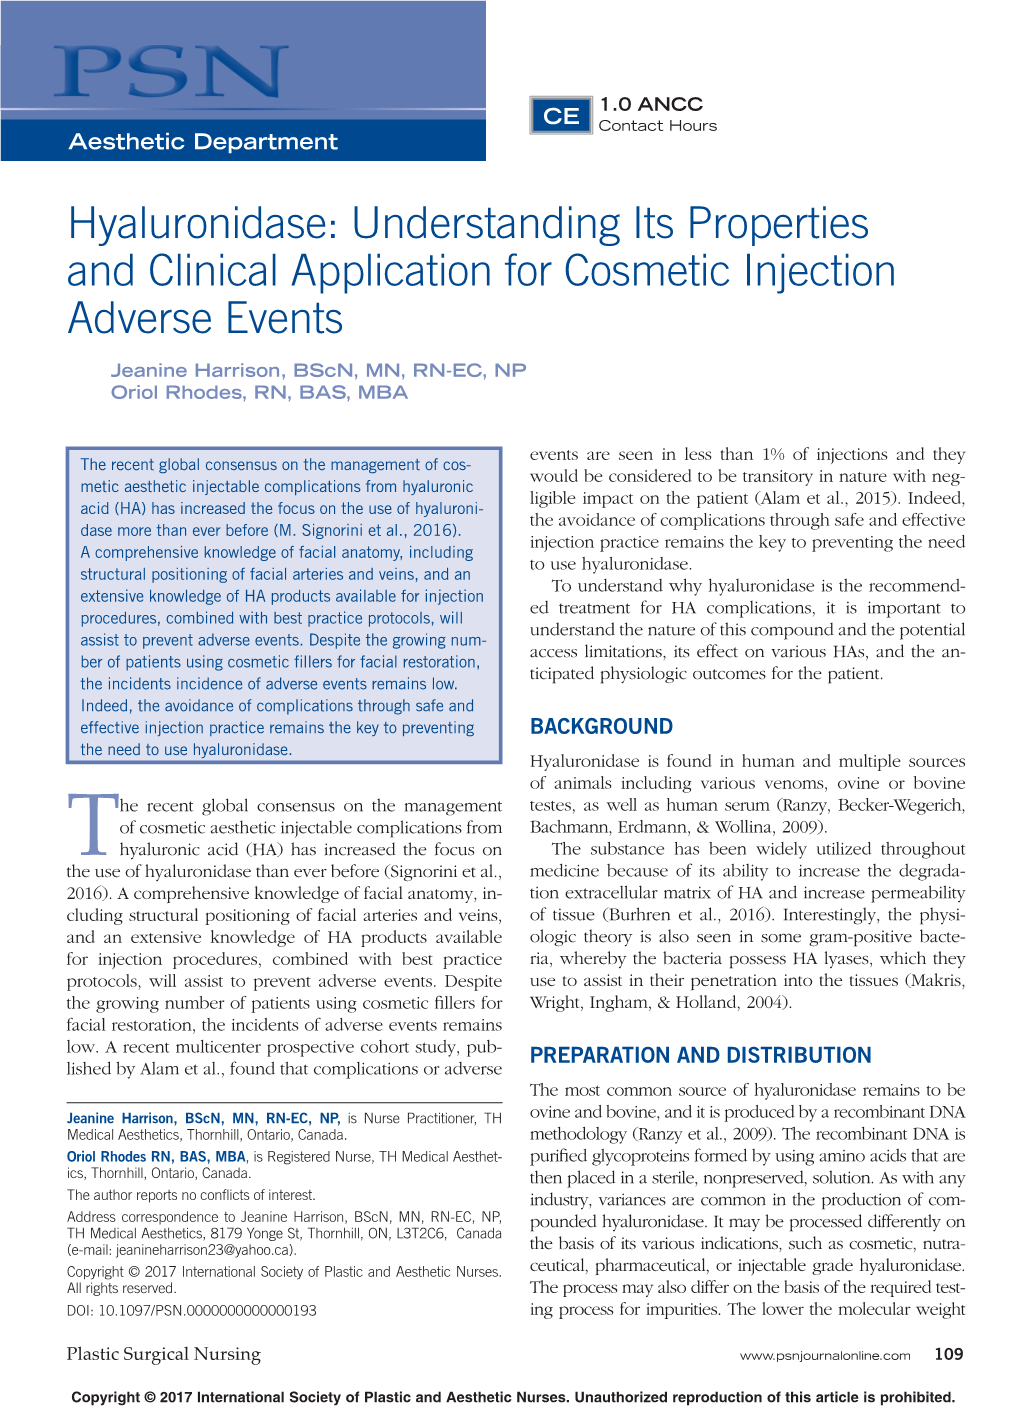 Hyaluronidase: Understanding Its Properties and Clinical Application for Cosmetic Injection Adverse Events